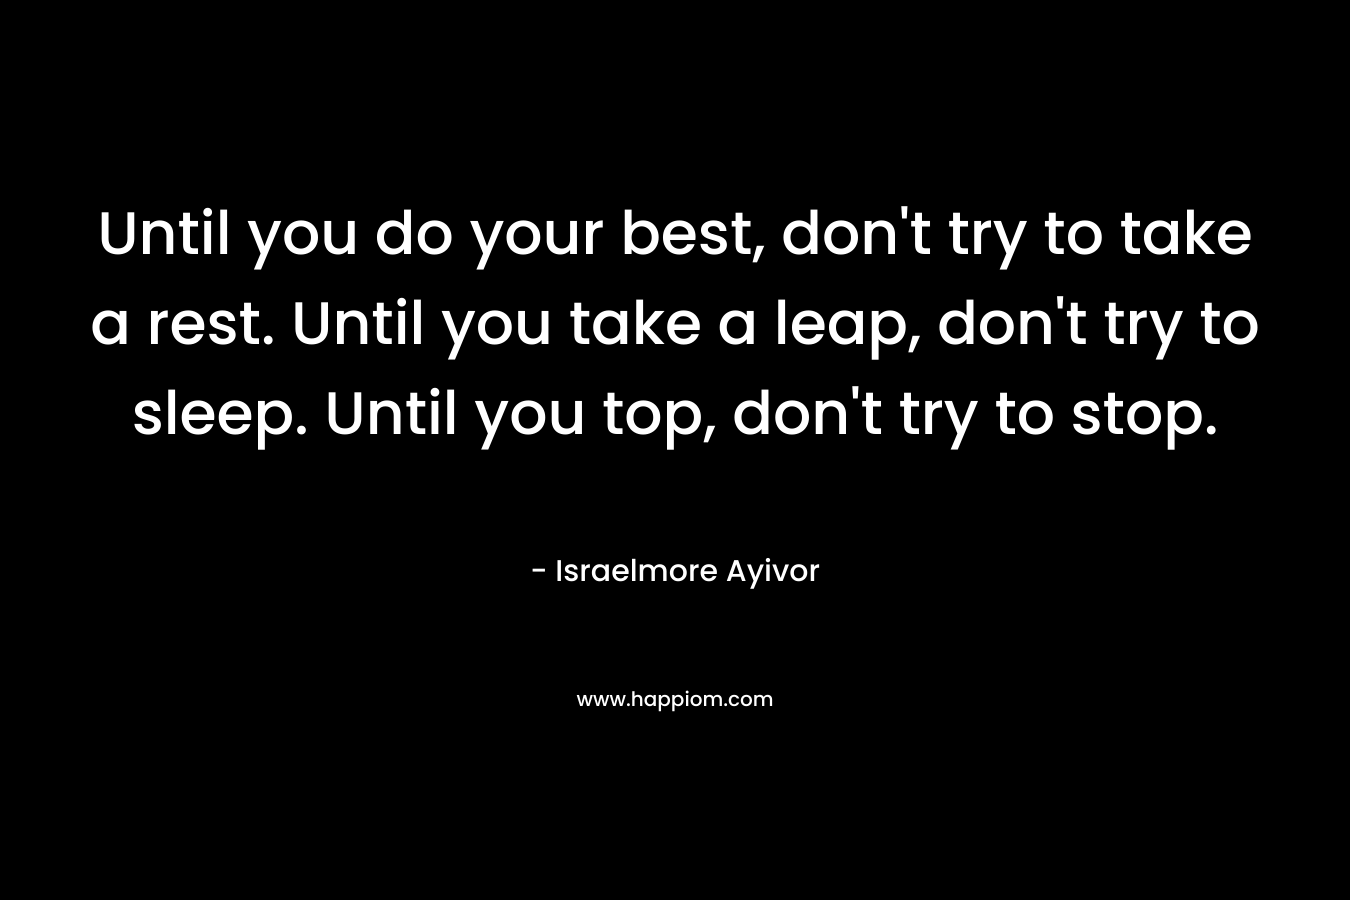 Until you do your best, don't try to take a rest. Until you take a leap, don't try to sleep. Until you top, don't try to stop.